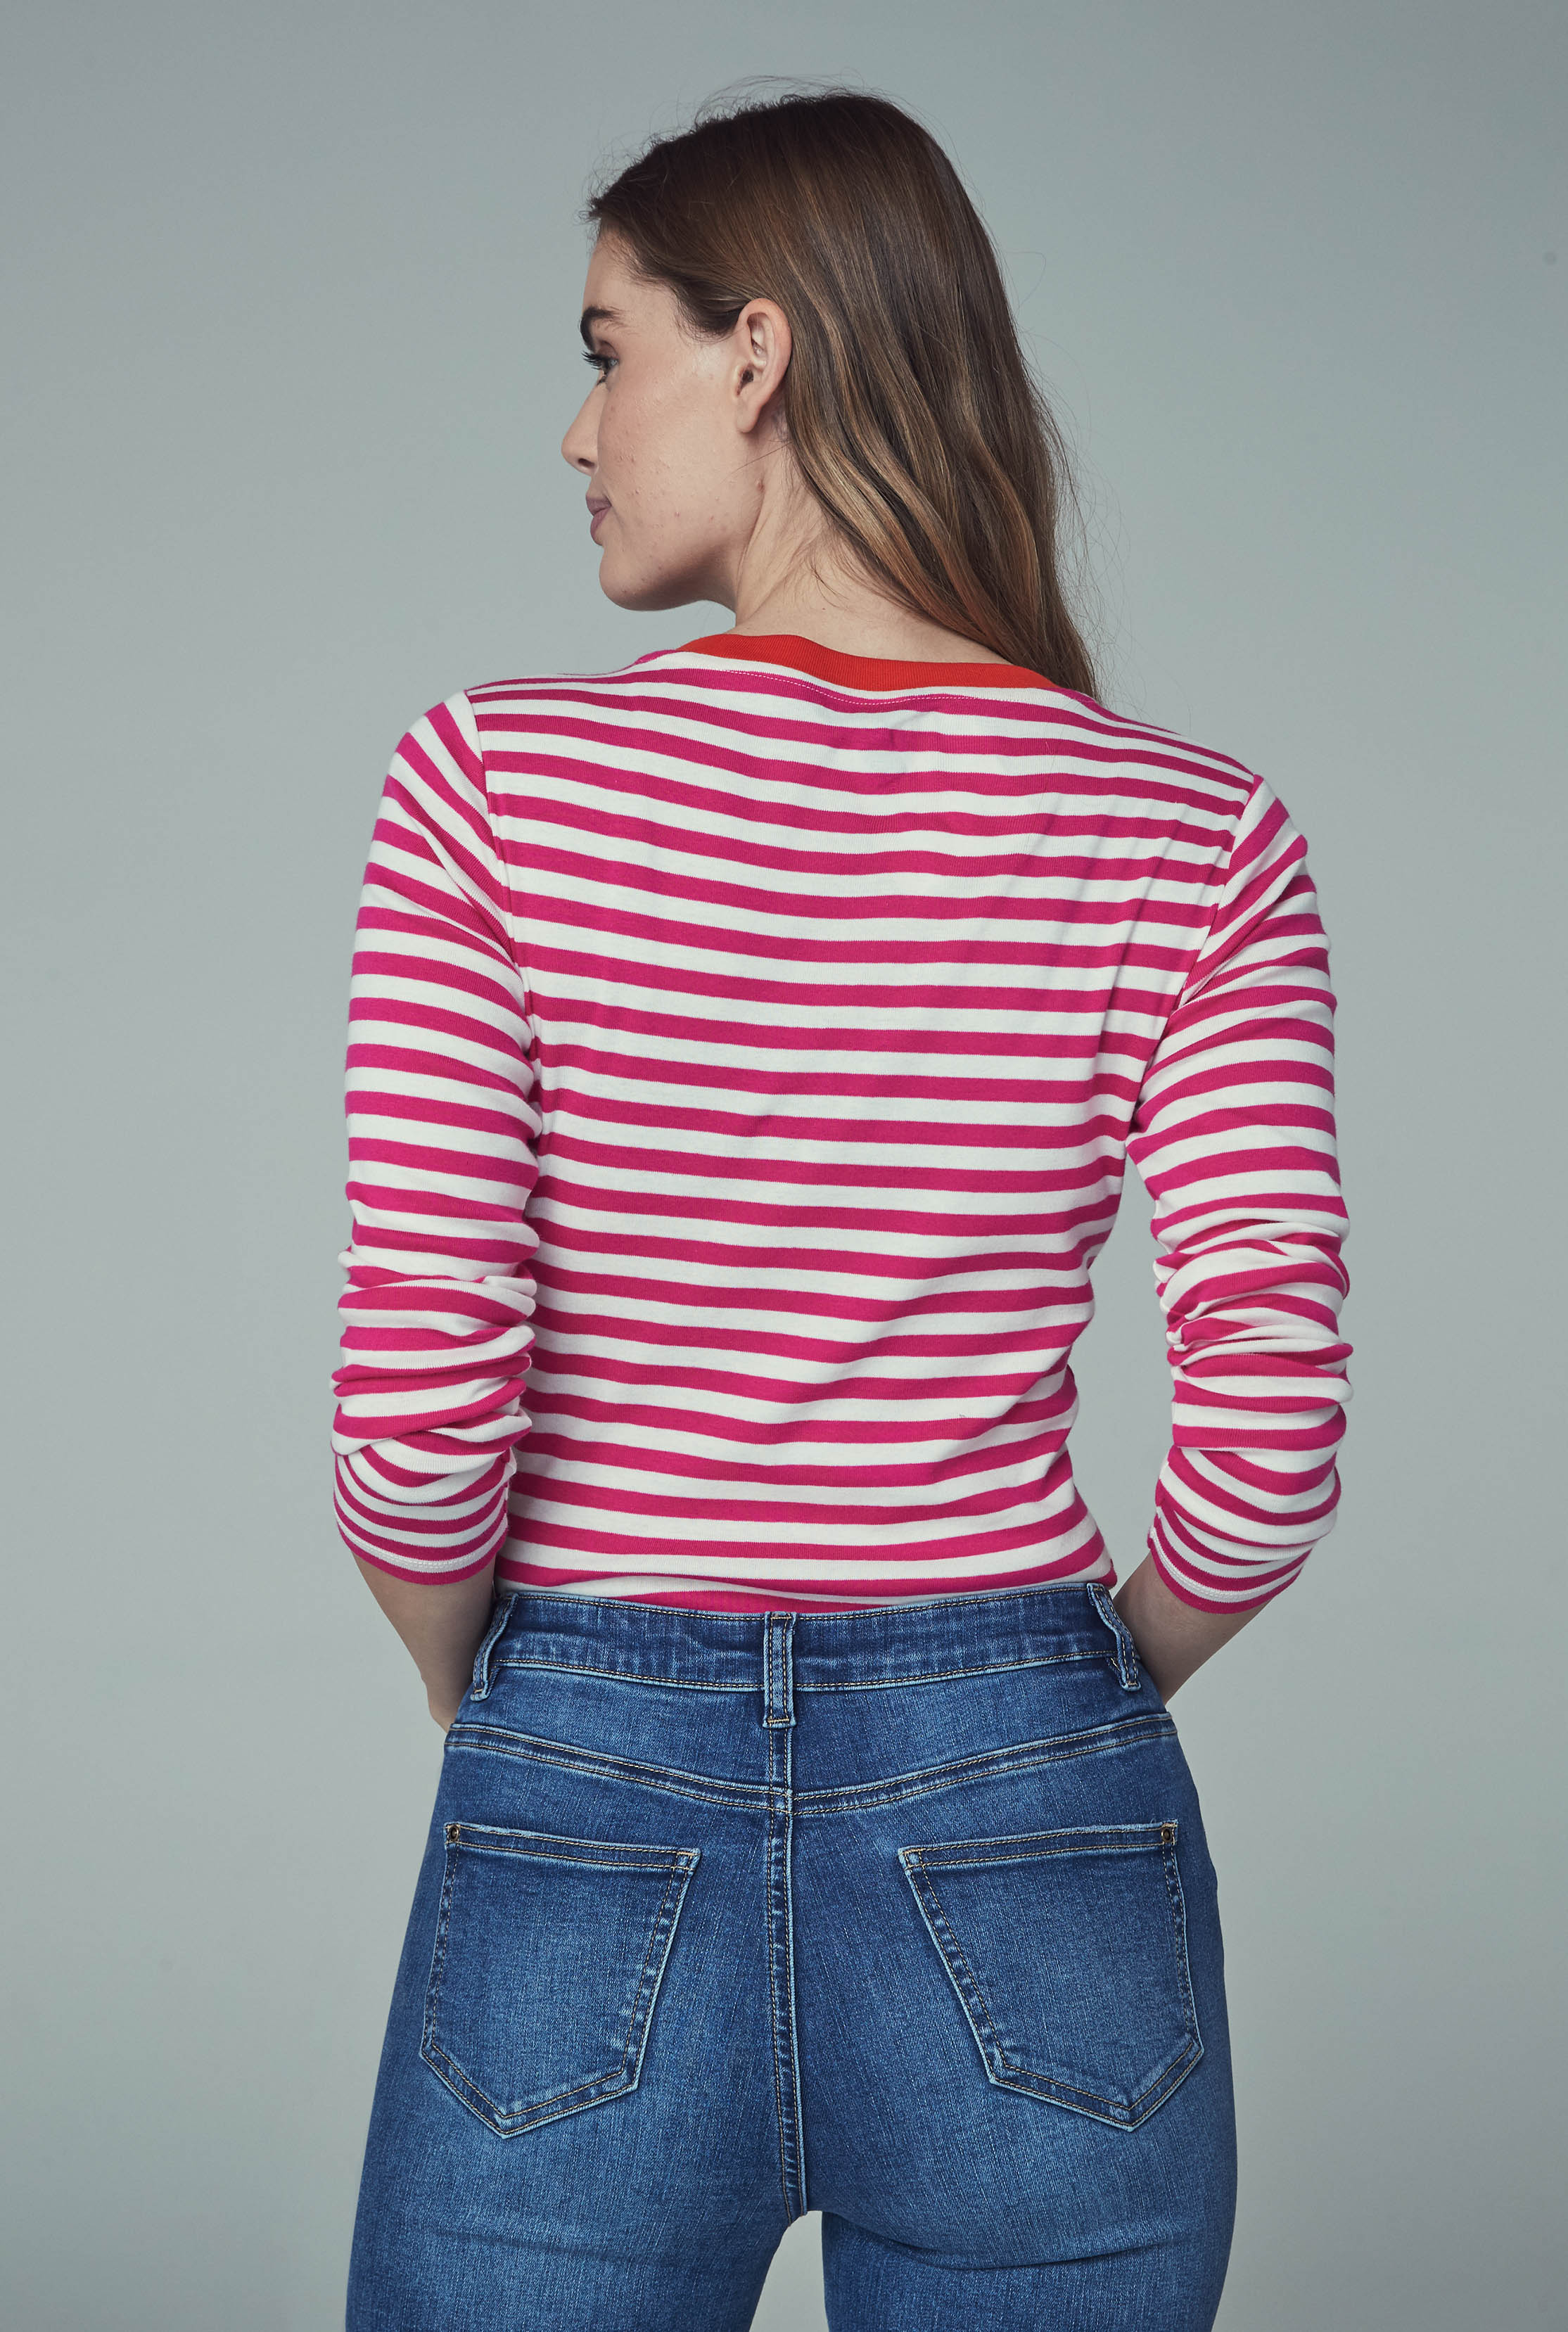 White and Red Stripe T-Shirt | Long Tall Sally